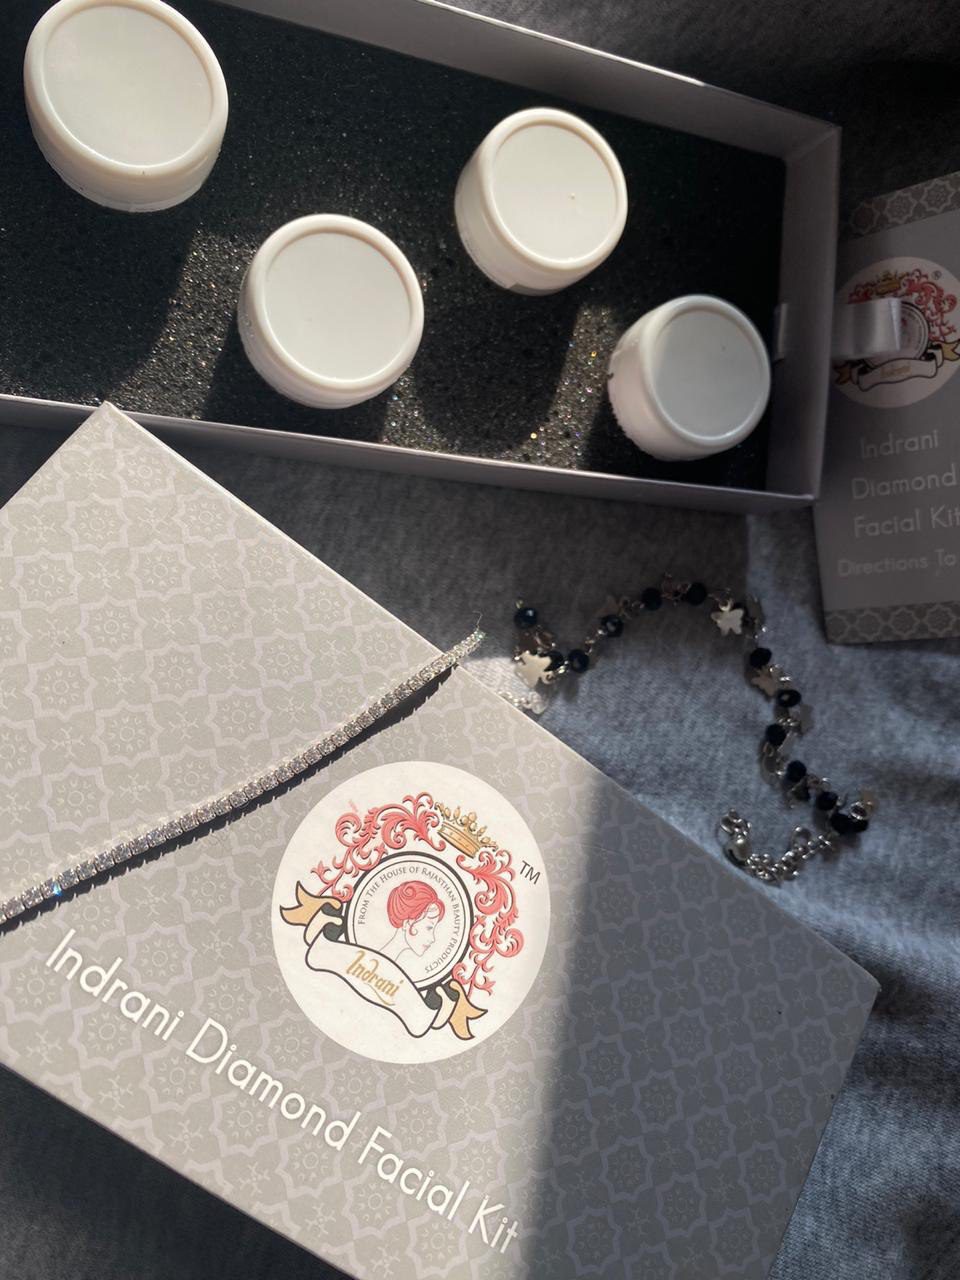 Read more about the article Indrani Diamond Facial Kit Review